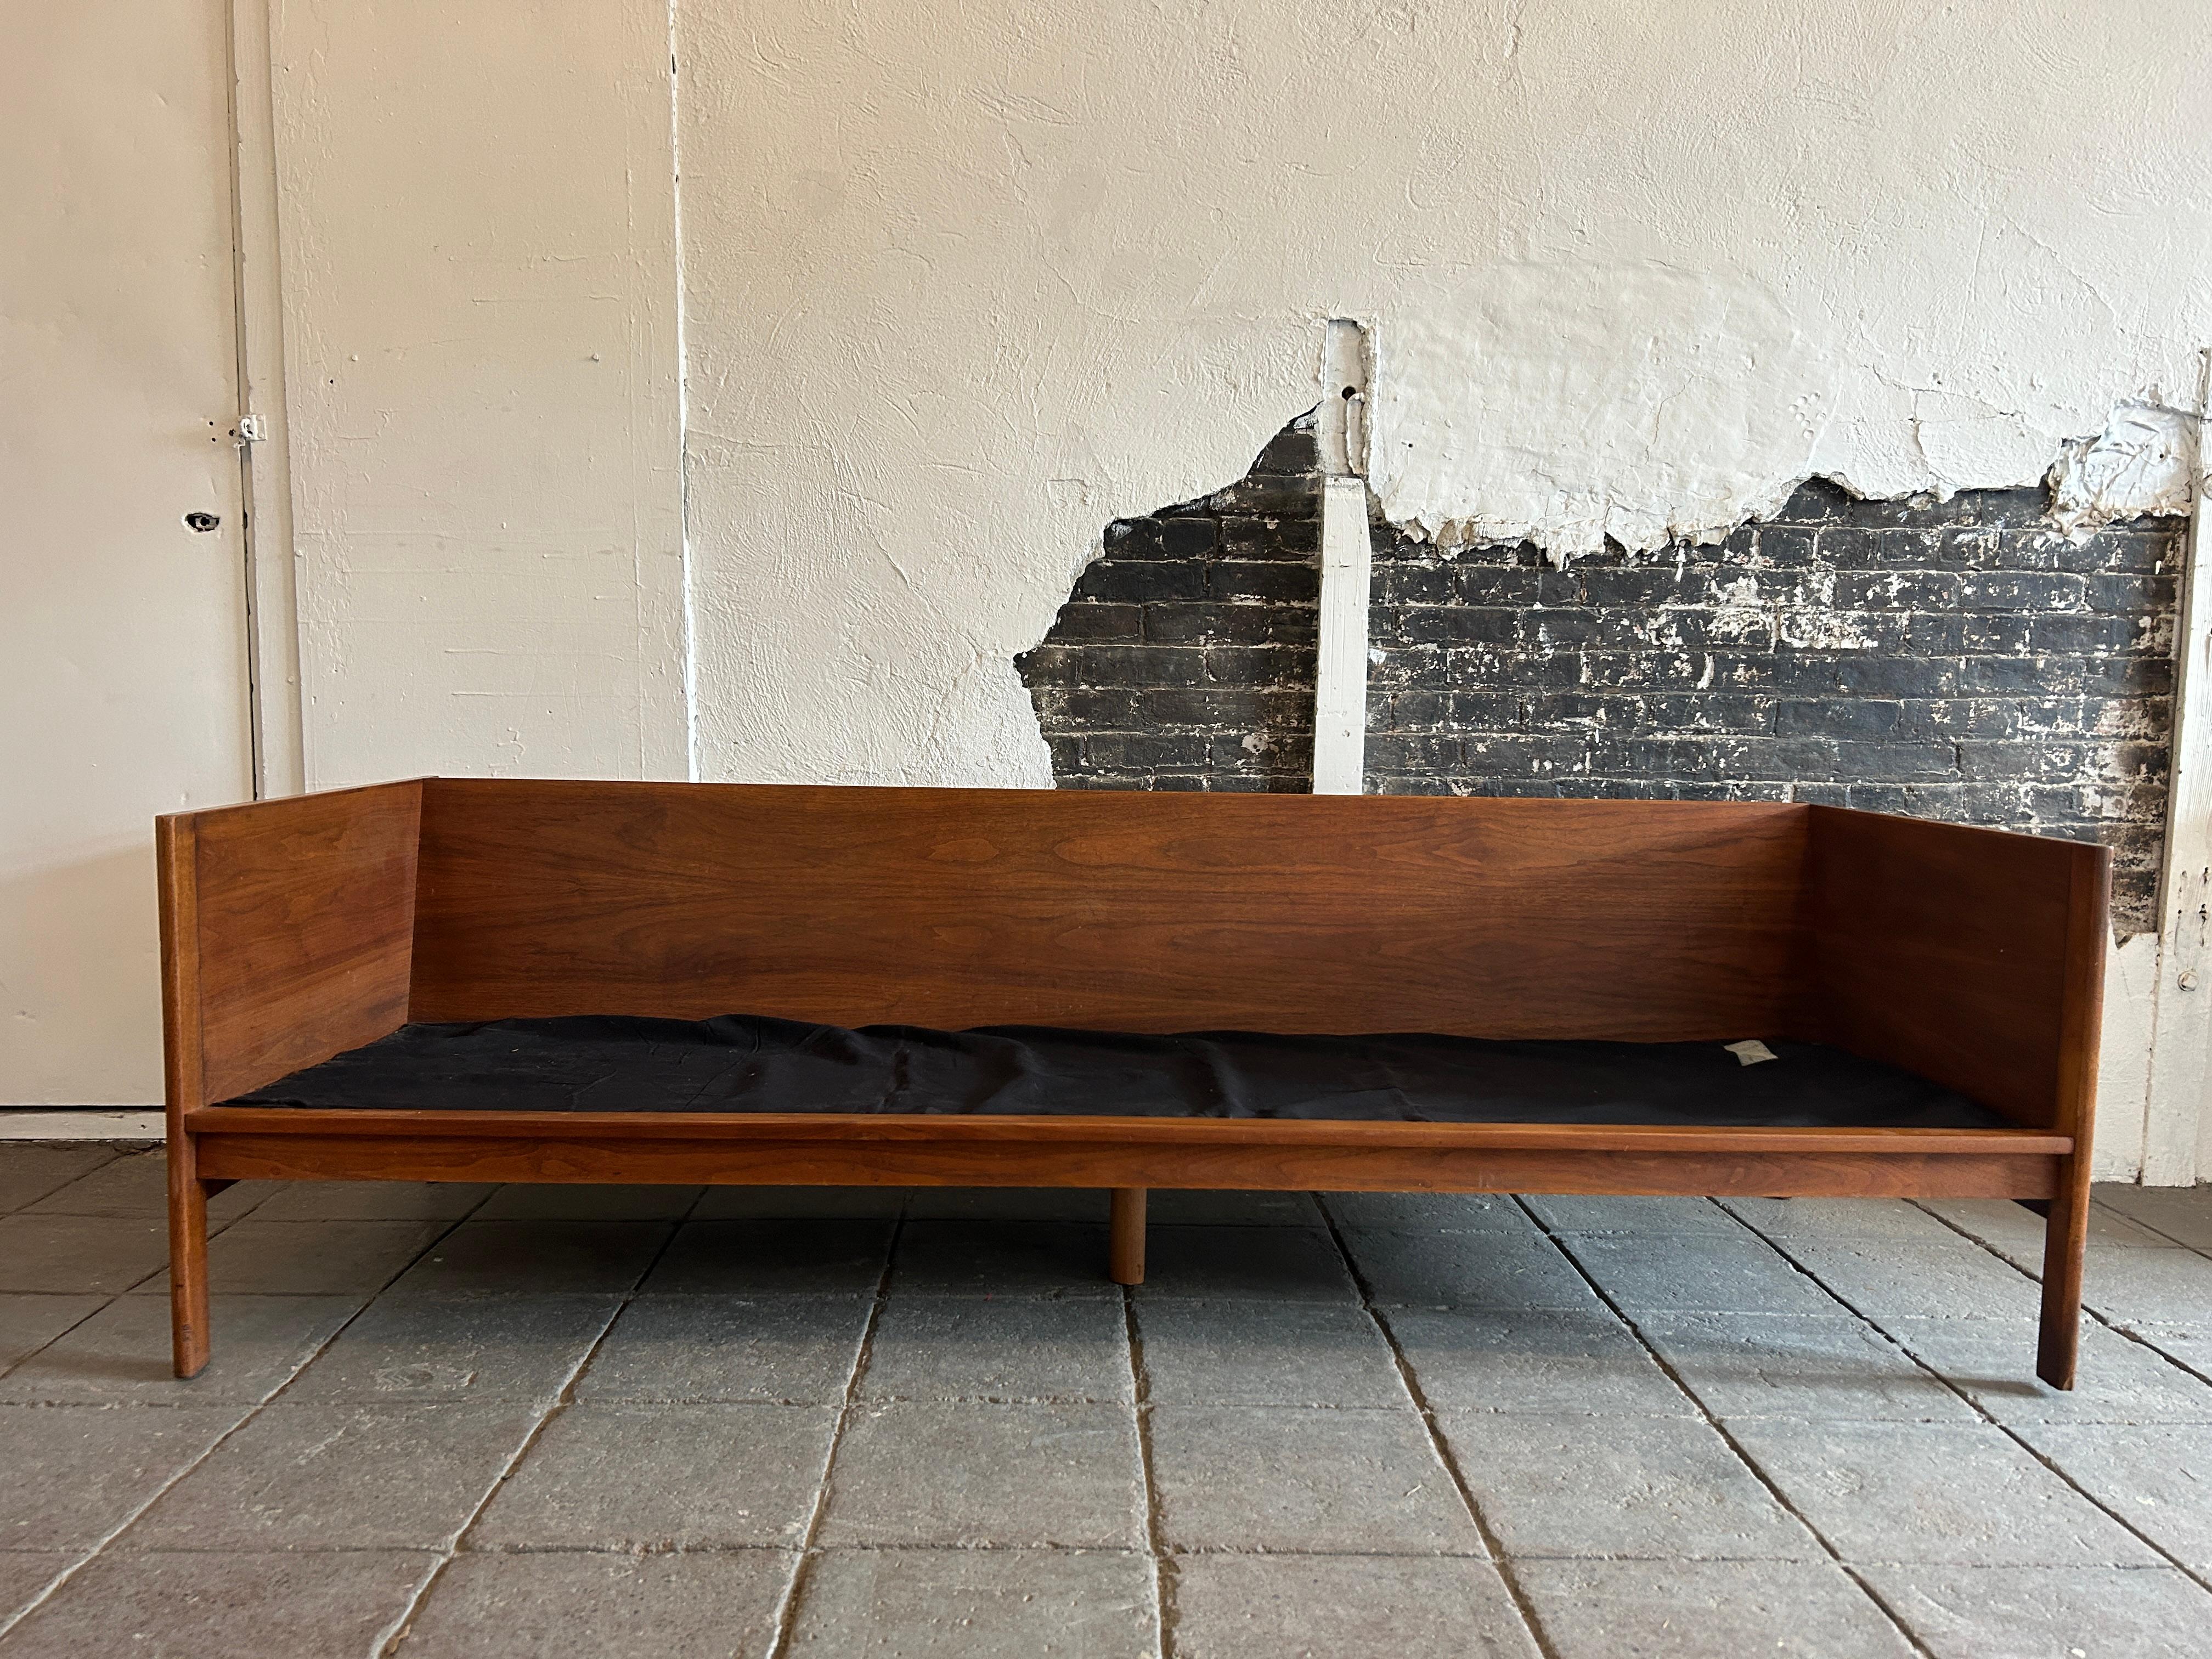 Upholstery Midcentury Walnut 3 Seat Platform Armed Sofa Daybed by Richard Artschwager For Sale